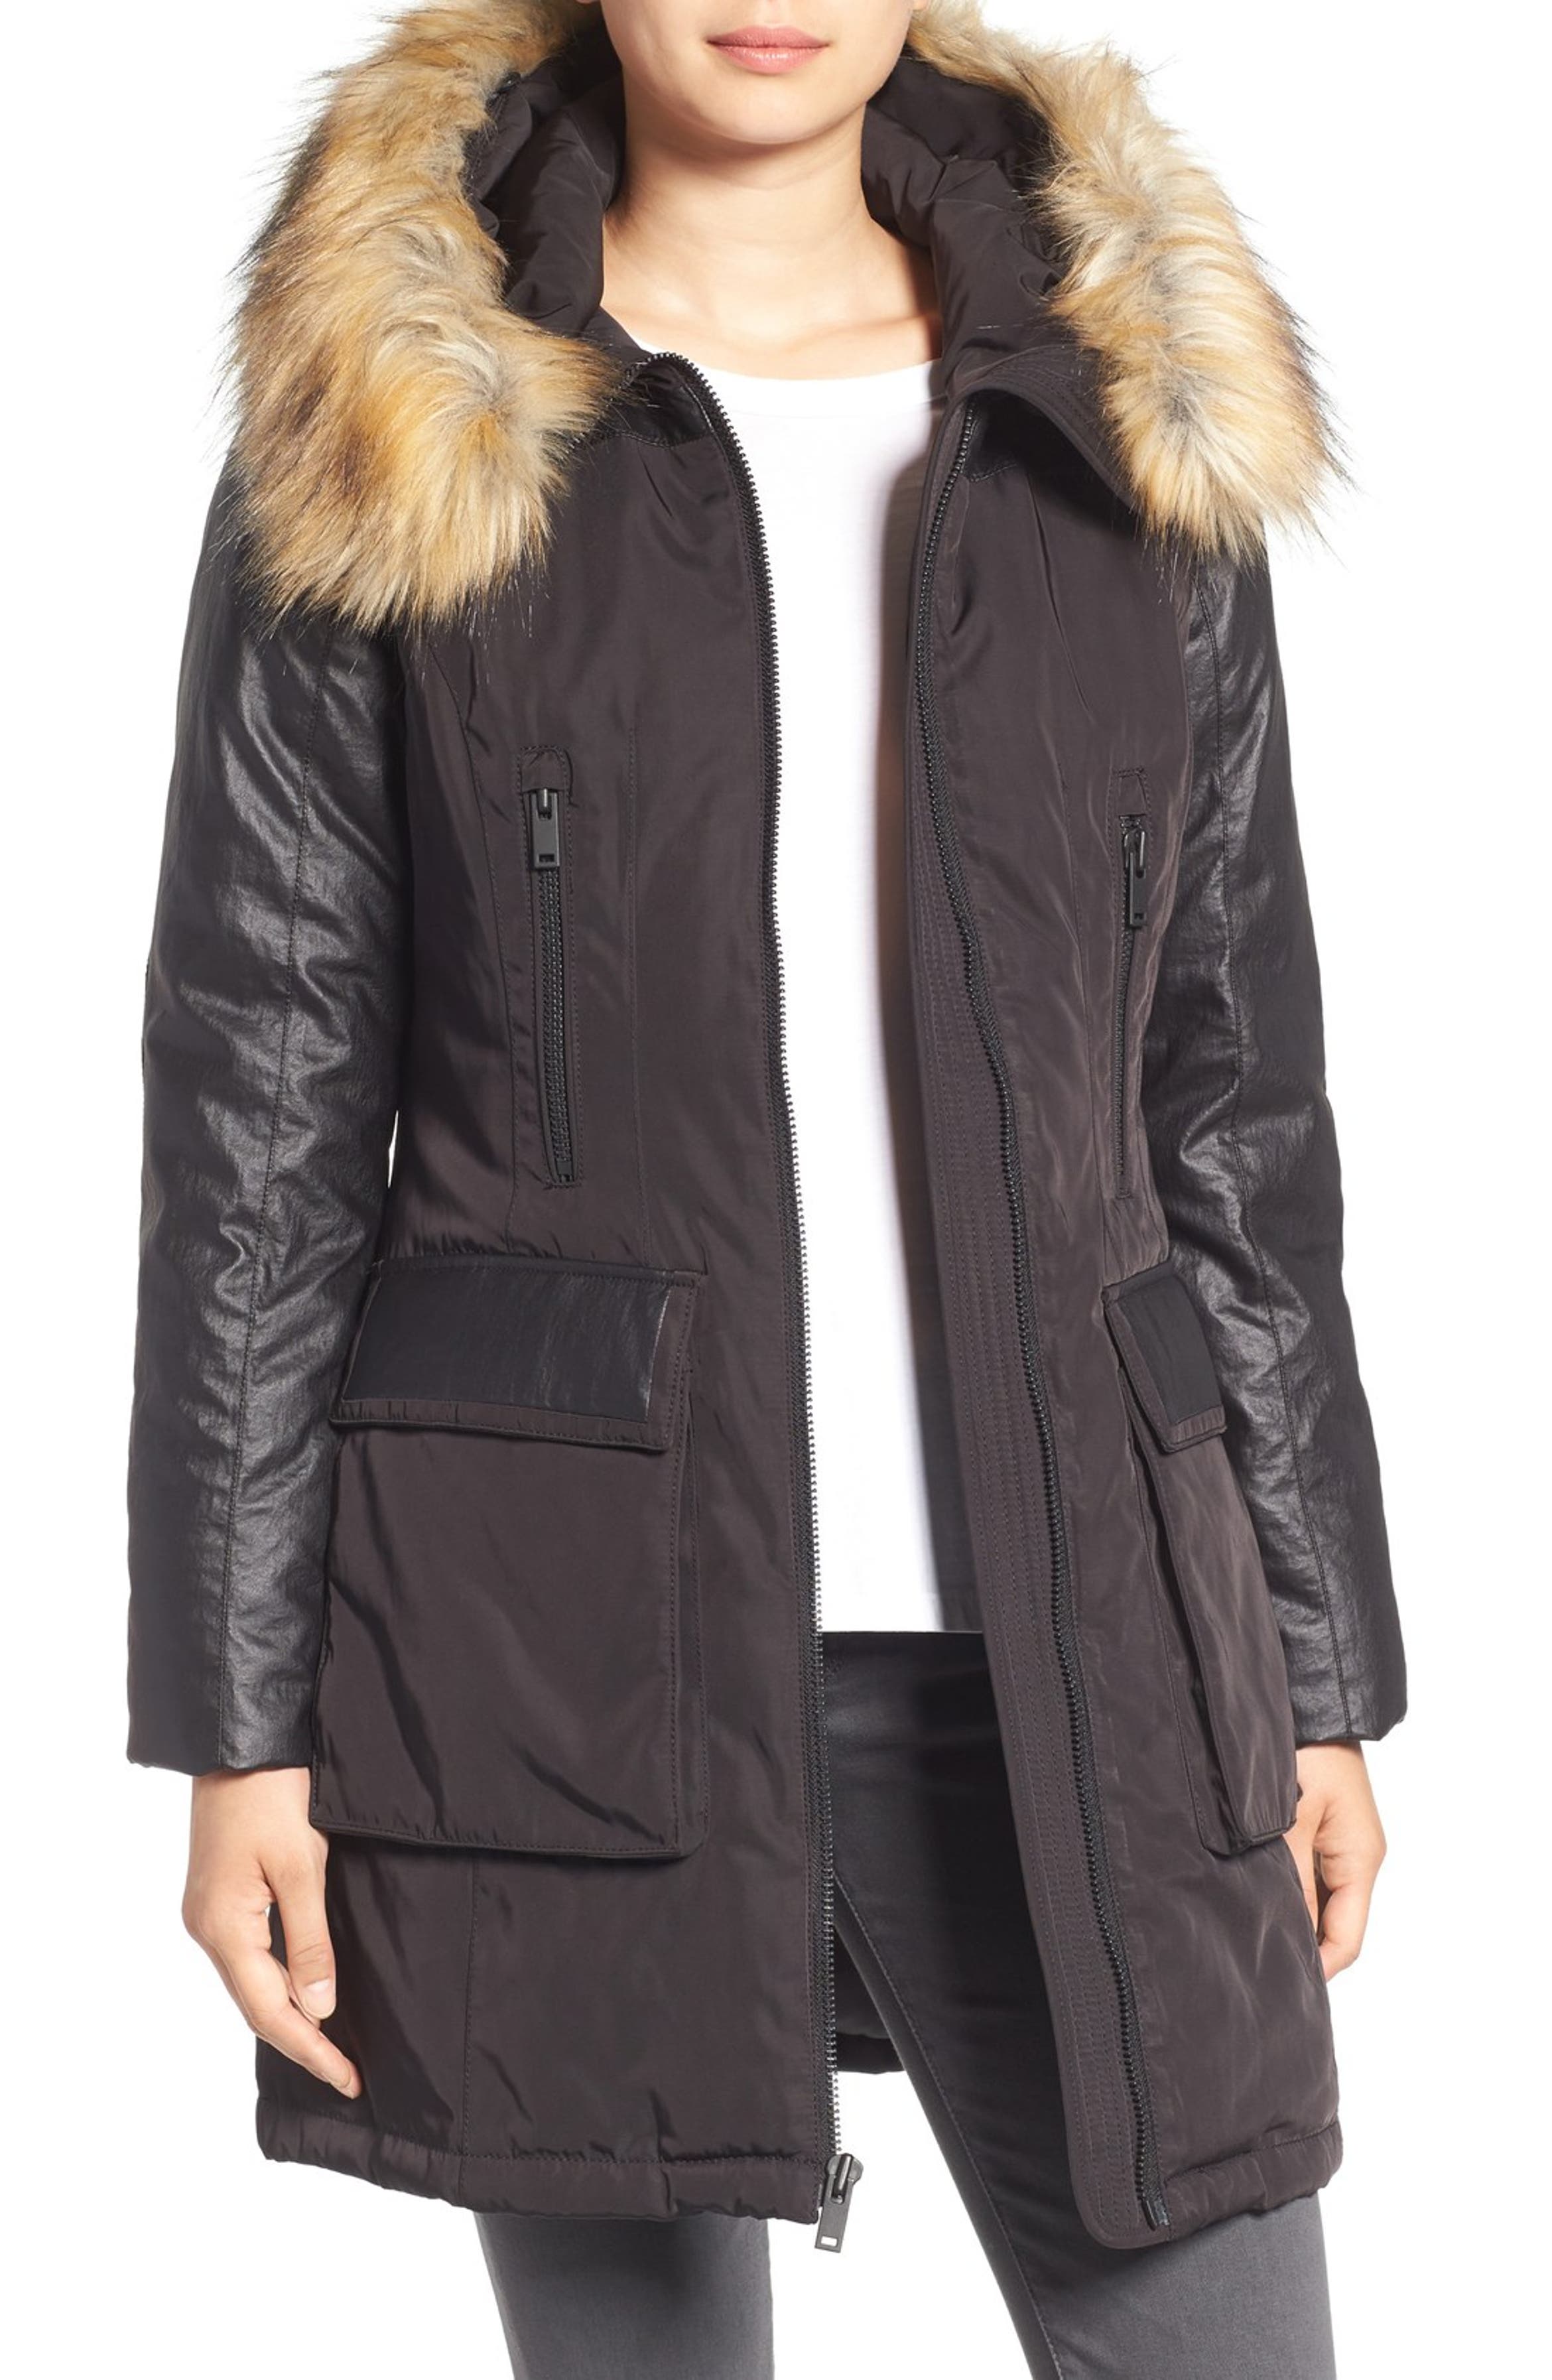 7 For All Mankind Mixed Media Coat with Removable Faux Fur Trim | Nordstrom